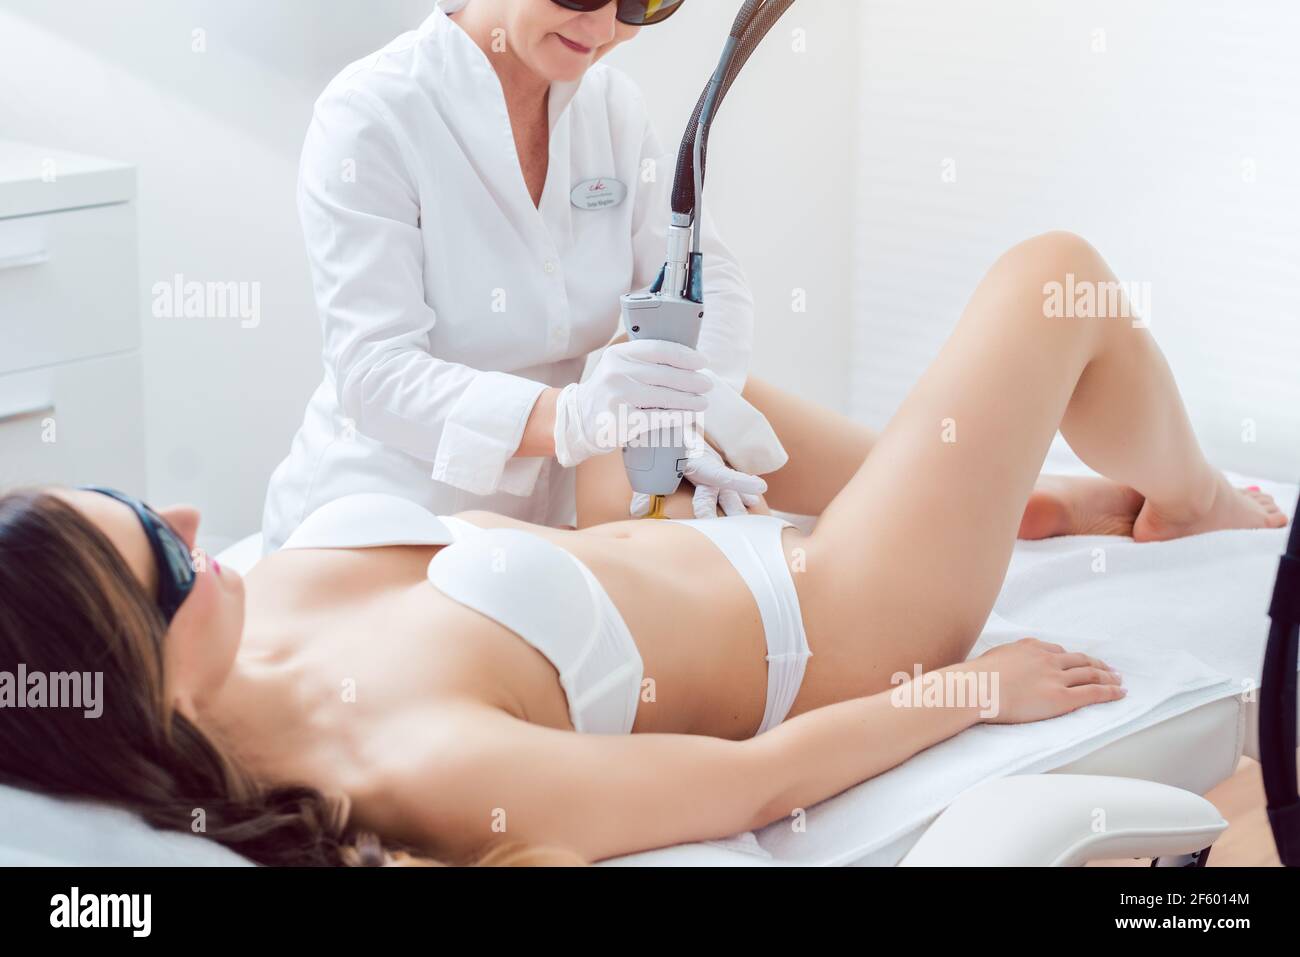 therapist using painless laser technology for hair removal Stock Photo